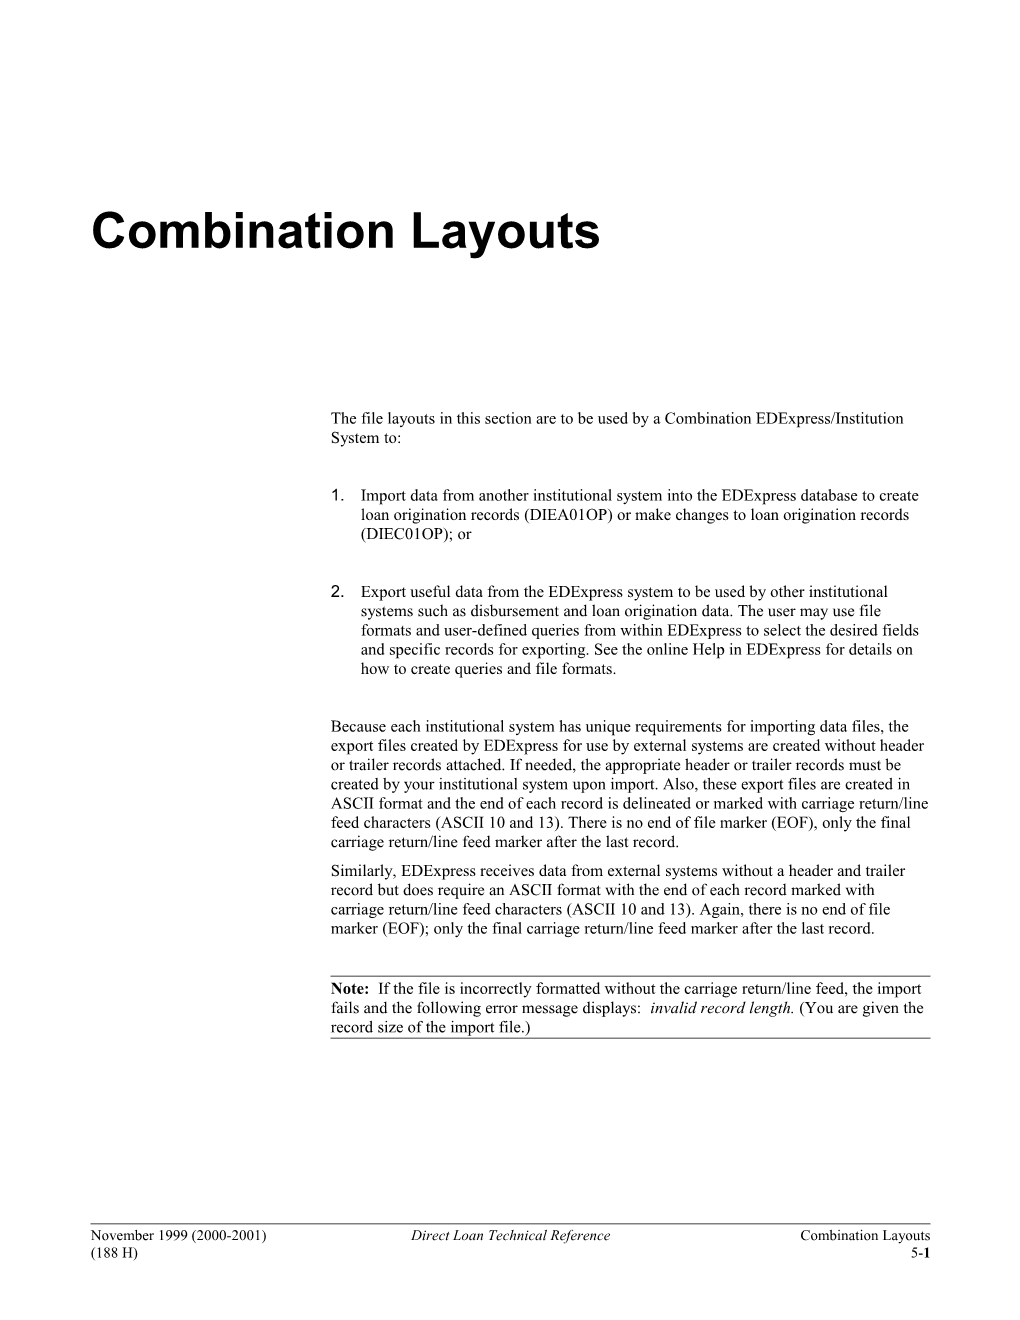 The File Layouts in This Section Are to Be Used by a Combination Edexpress/Institution